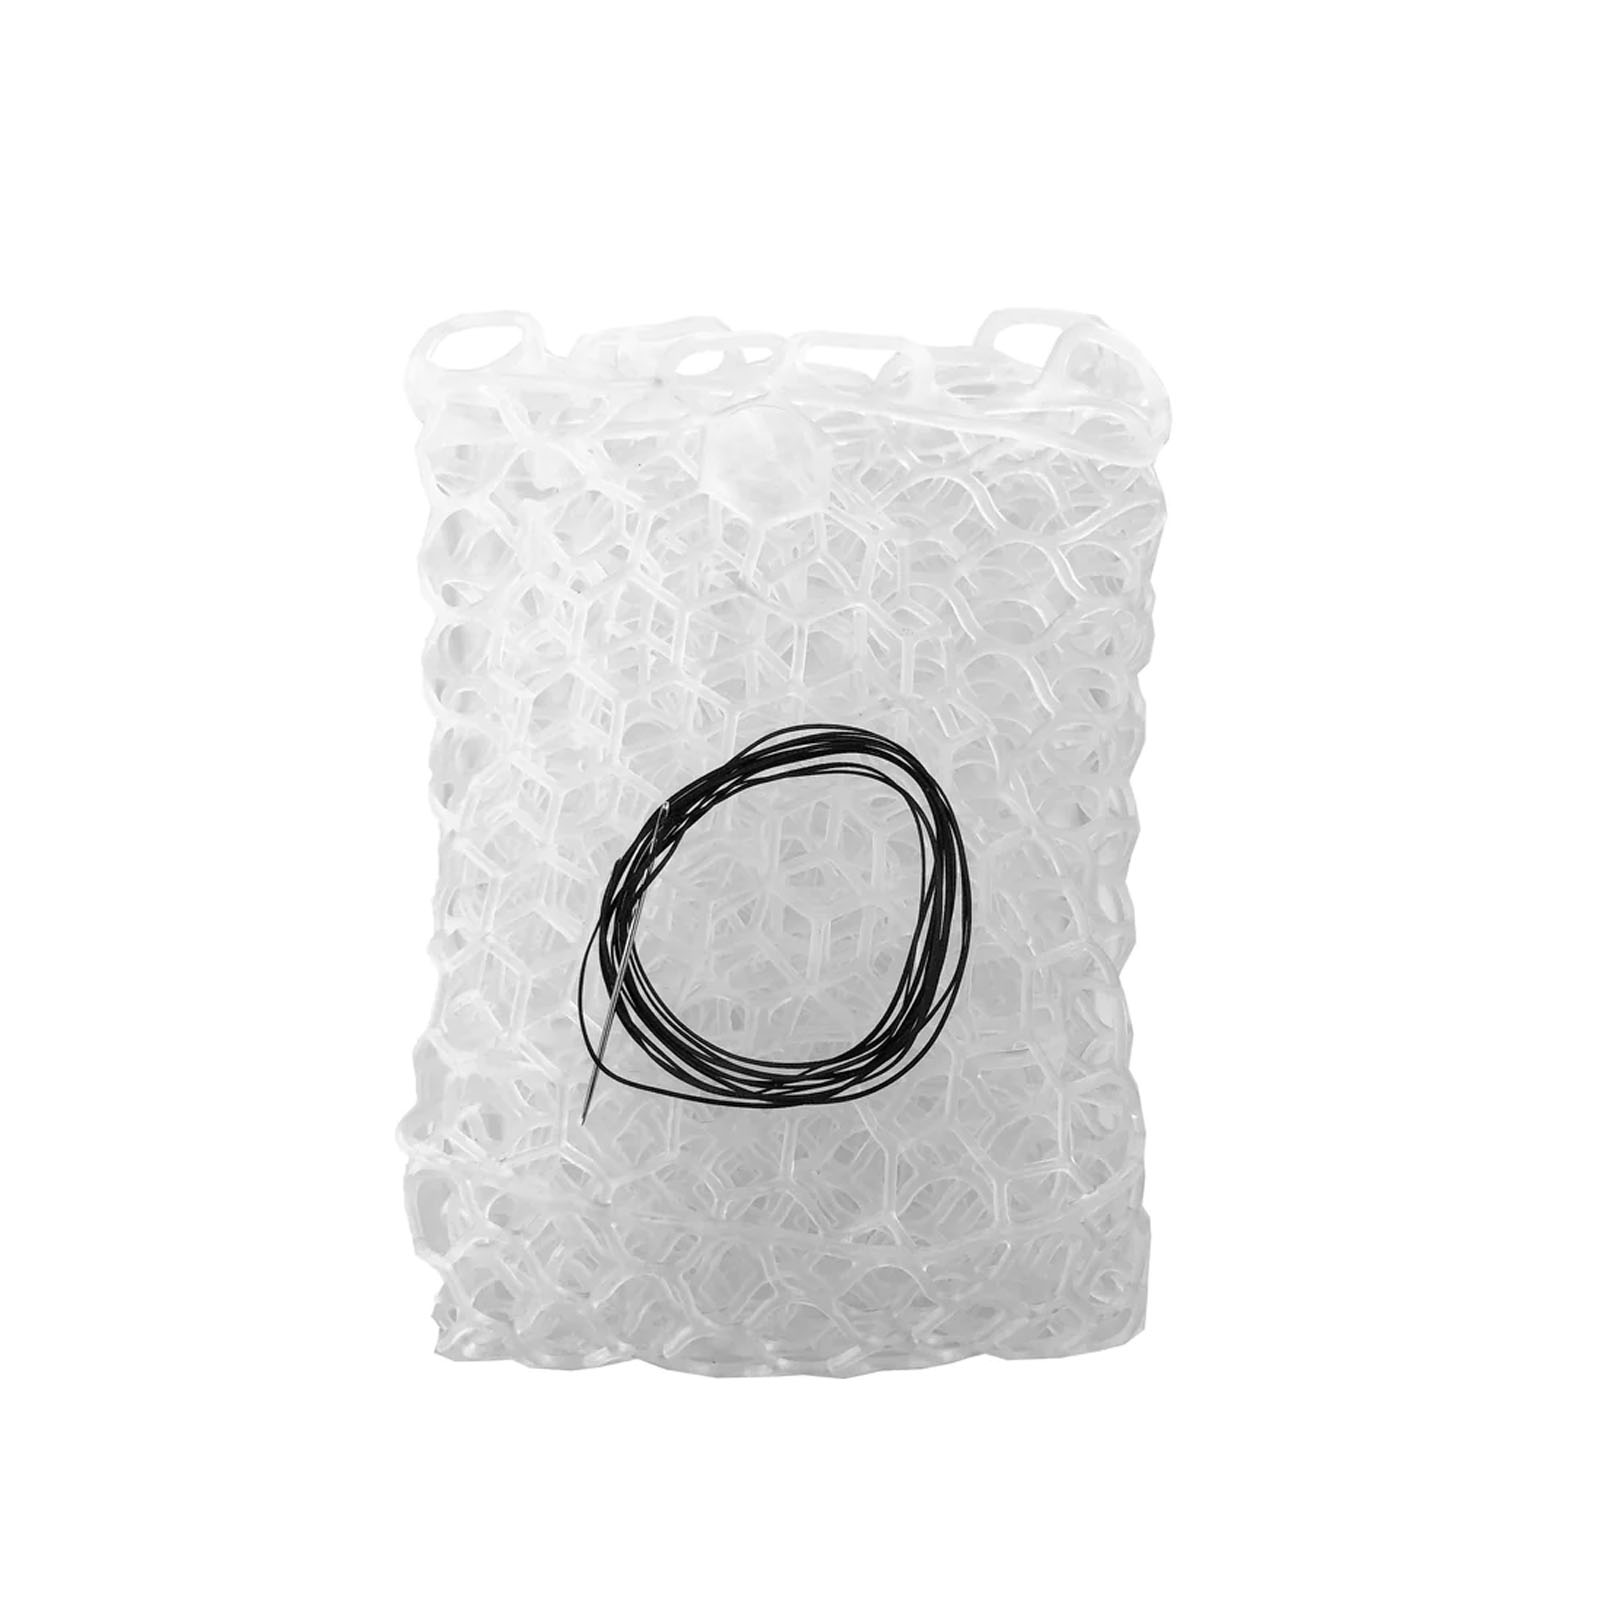 Fishpond Nomad Replacement Rubber Net Kit - AvidMax